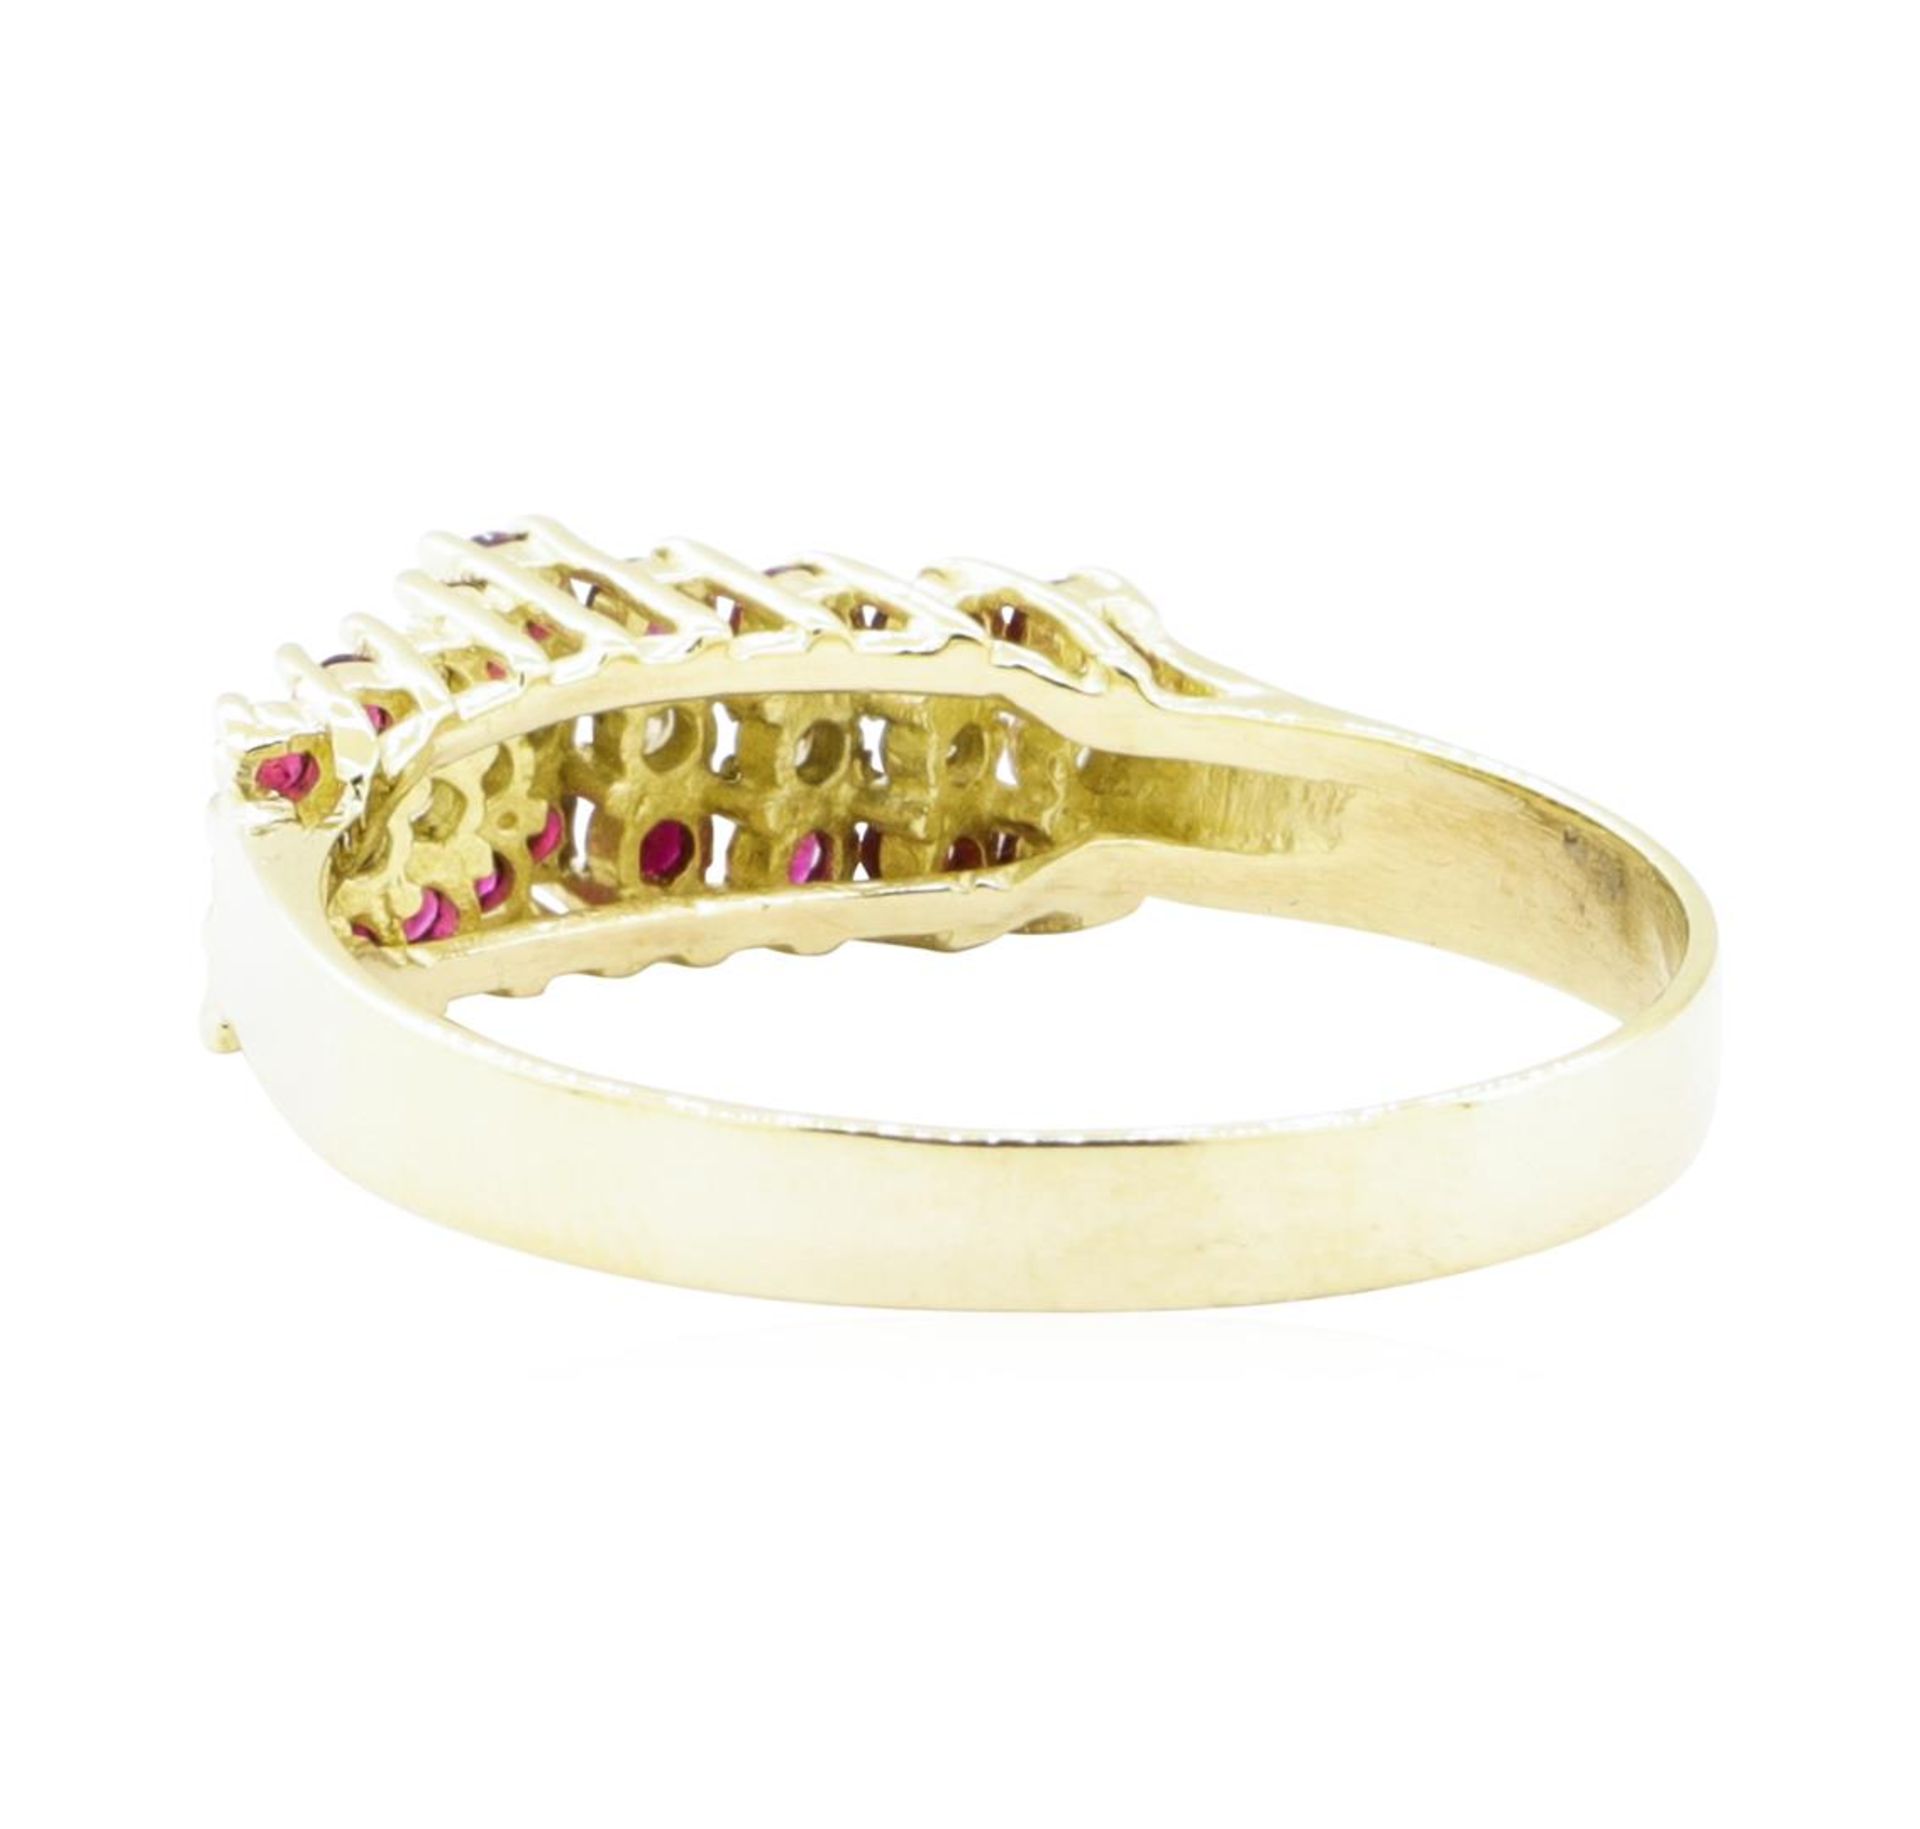 0.70 ctw Ruby and Diamond Ring - 14KT Yellow Gold - Image 3 of 4